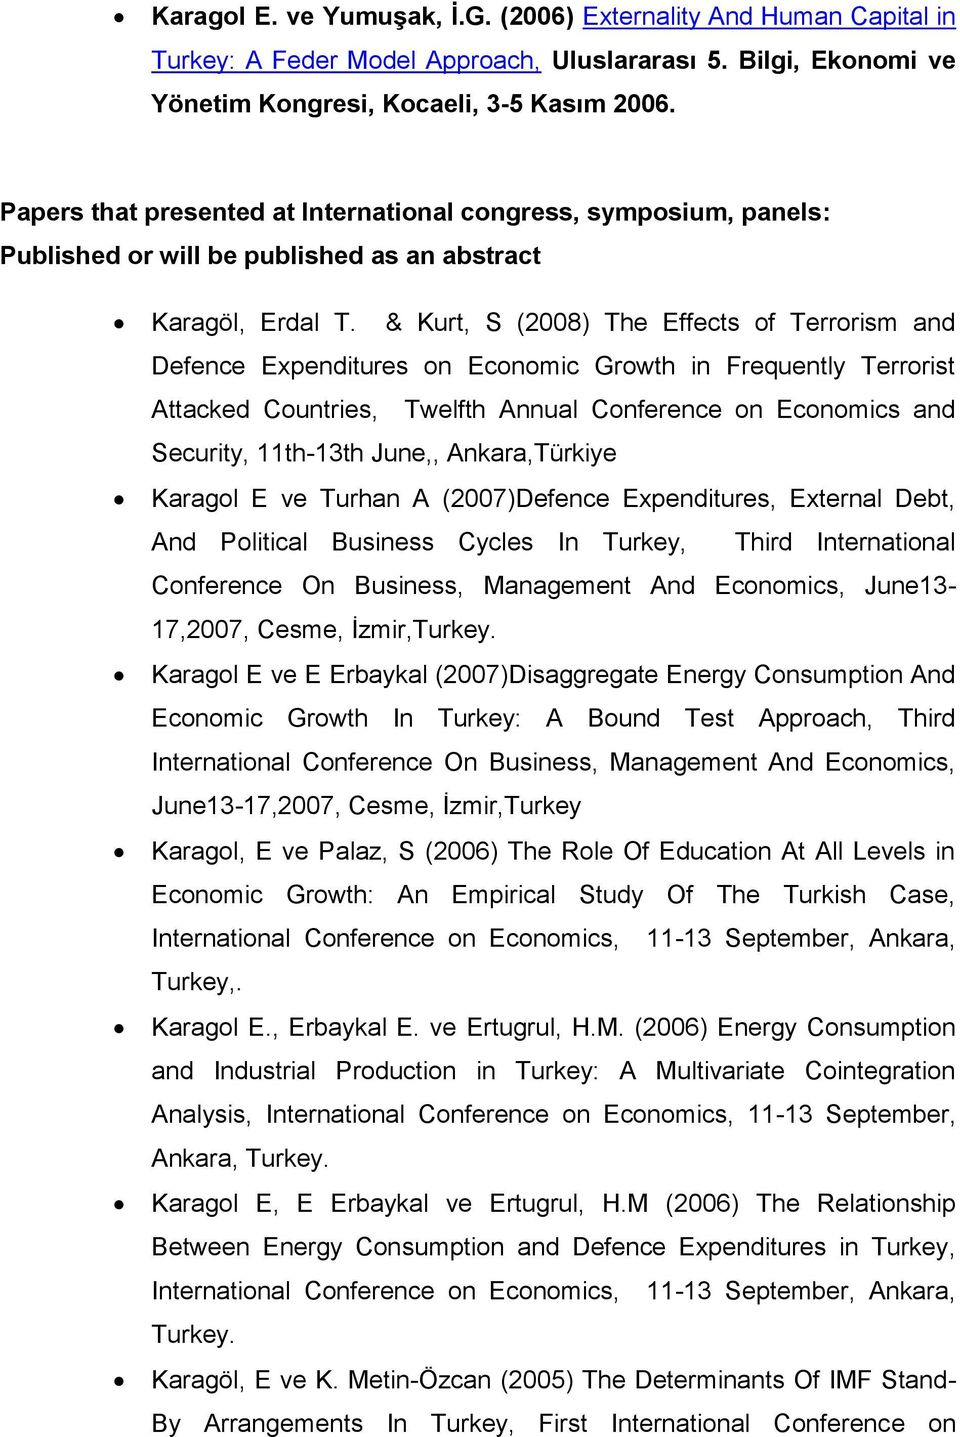 & Kurt, S (2008) The Effects of Terrorism and Defence Expenditures on Economic Growth in Frequently Terrorist Attacked Countries, Twelfth Annual Conference on Economics and Security, 11th-13th June,,